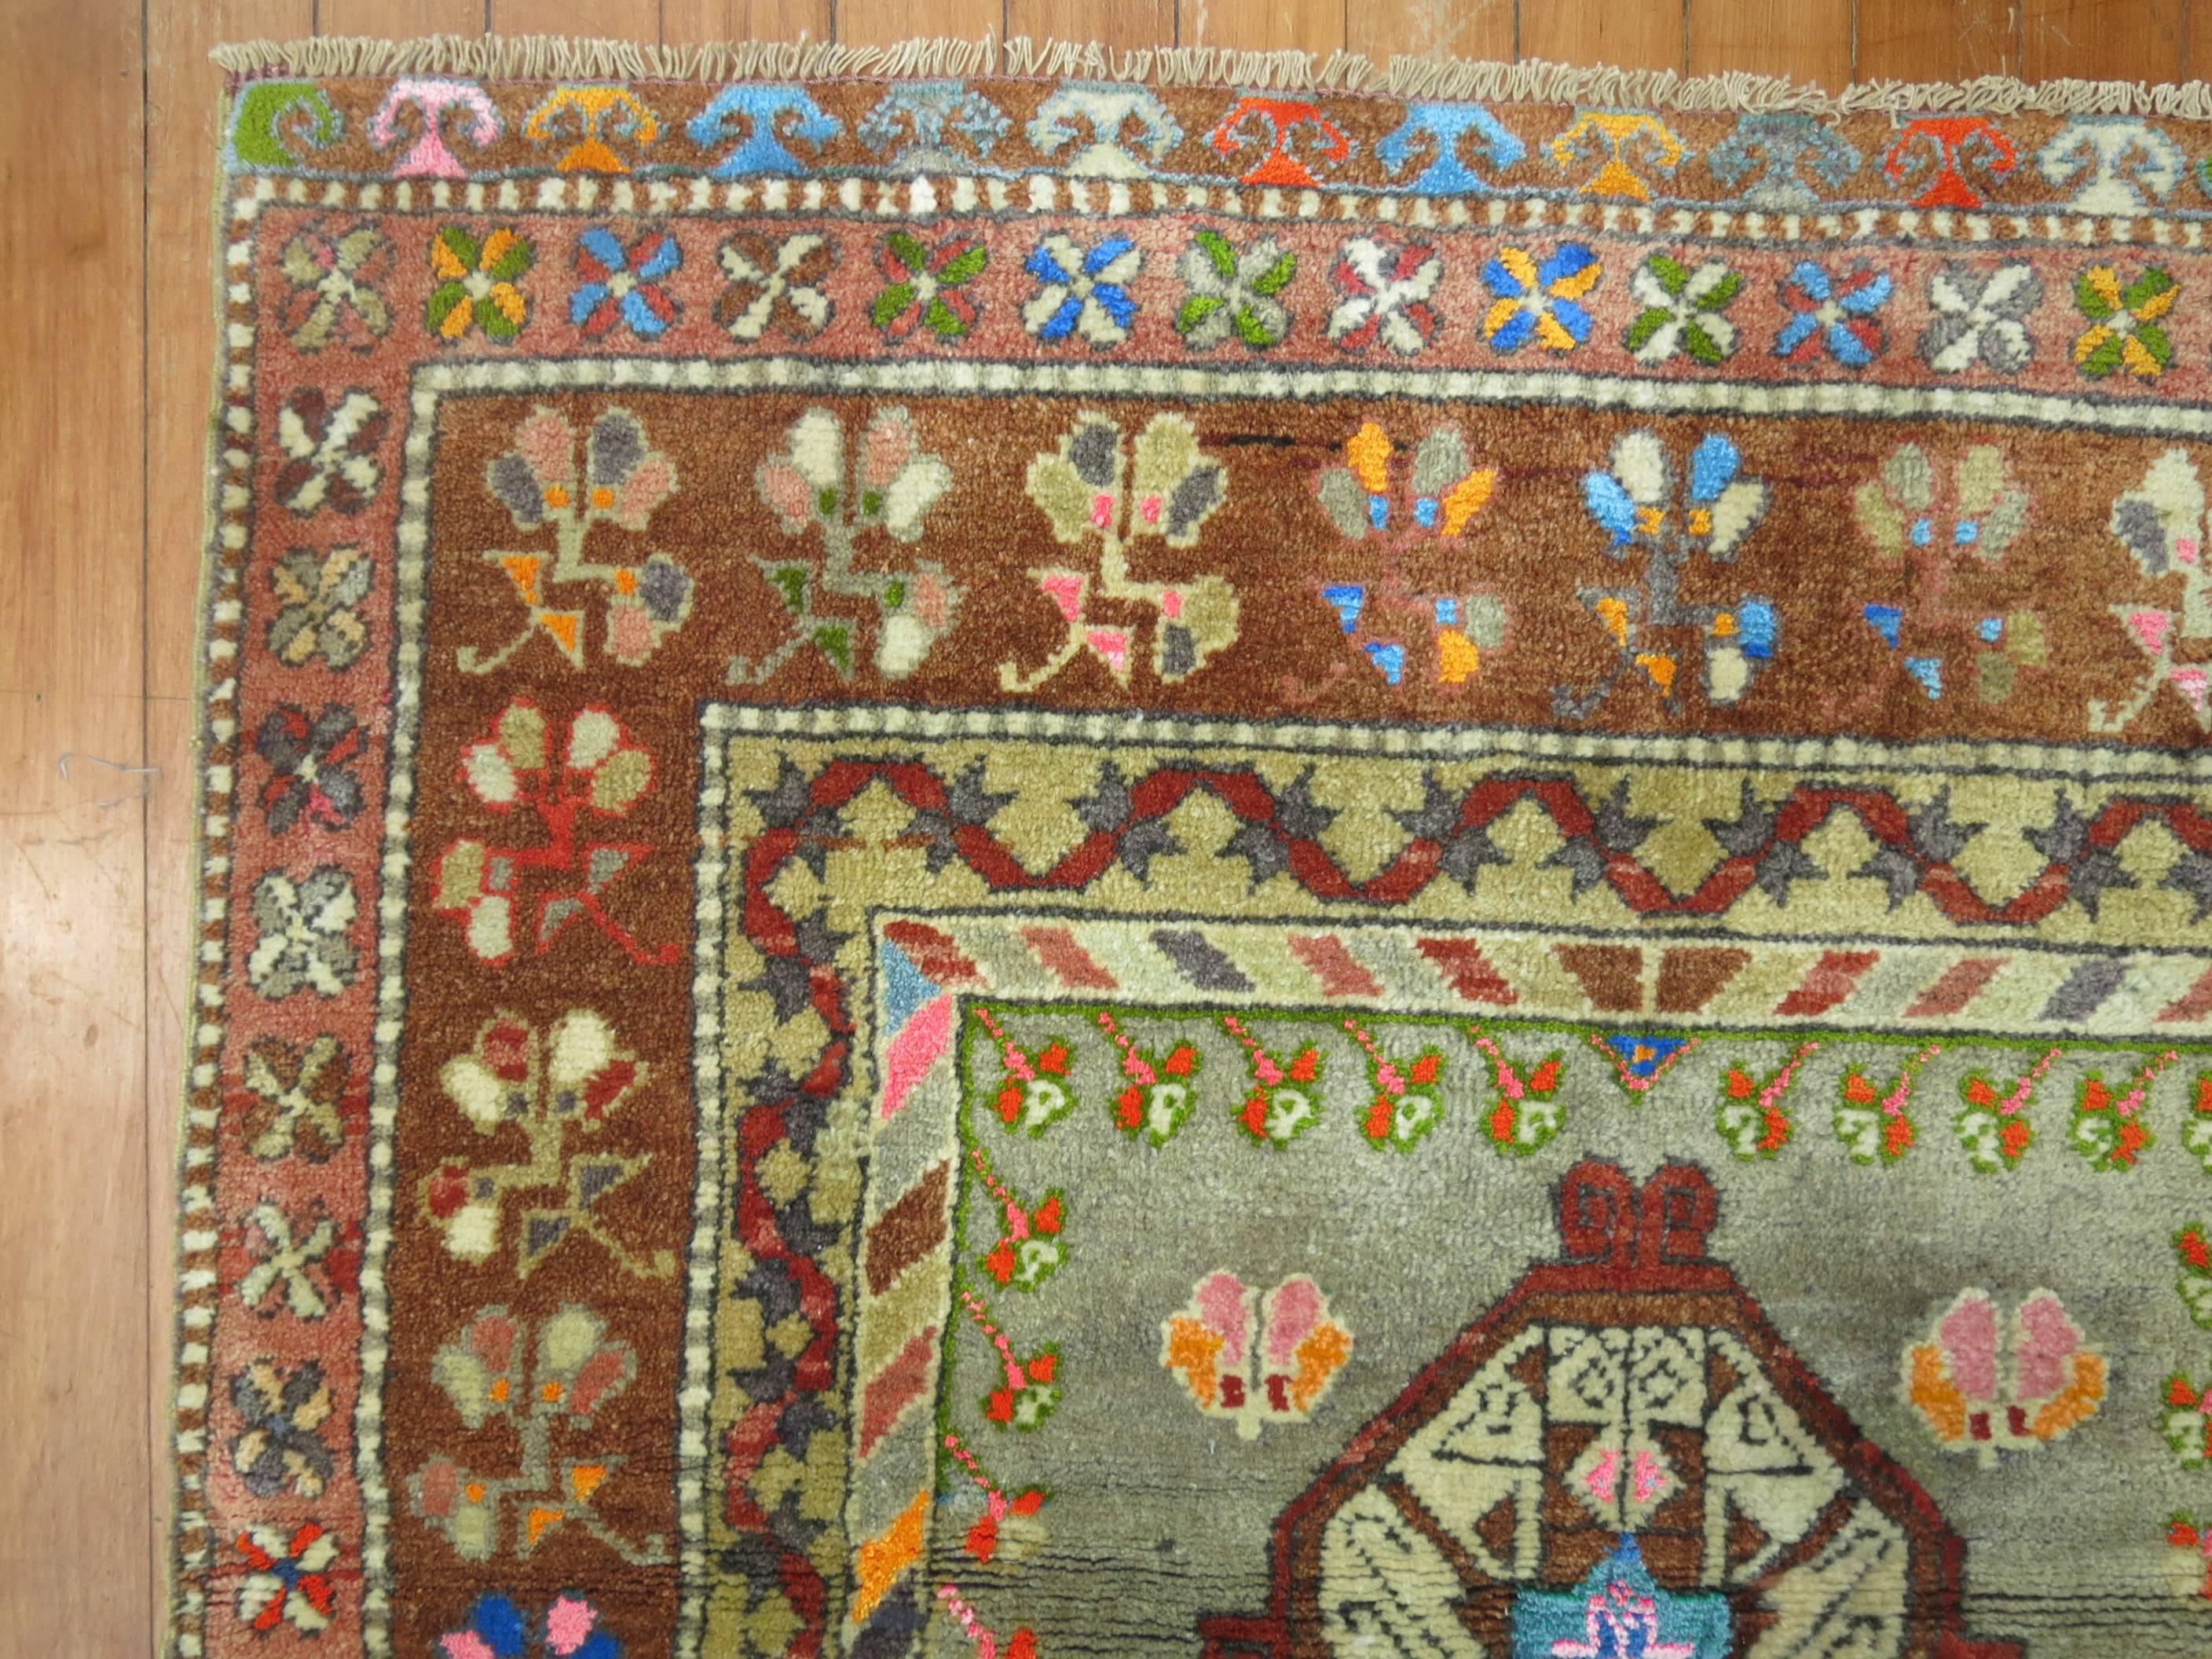 Eclectic best describes this colorful Turkish Anatolian rug.